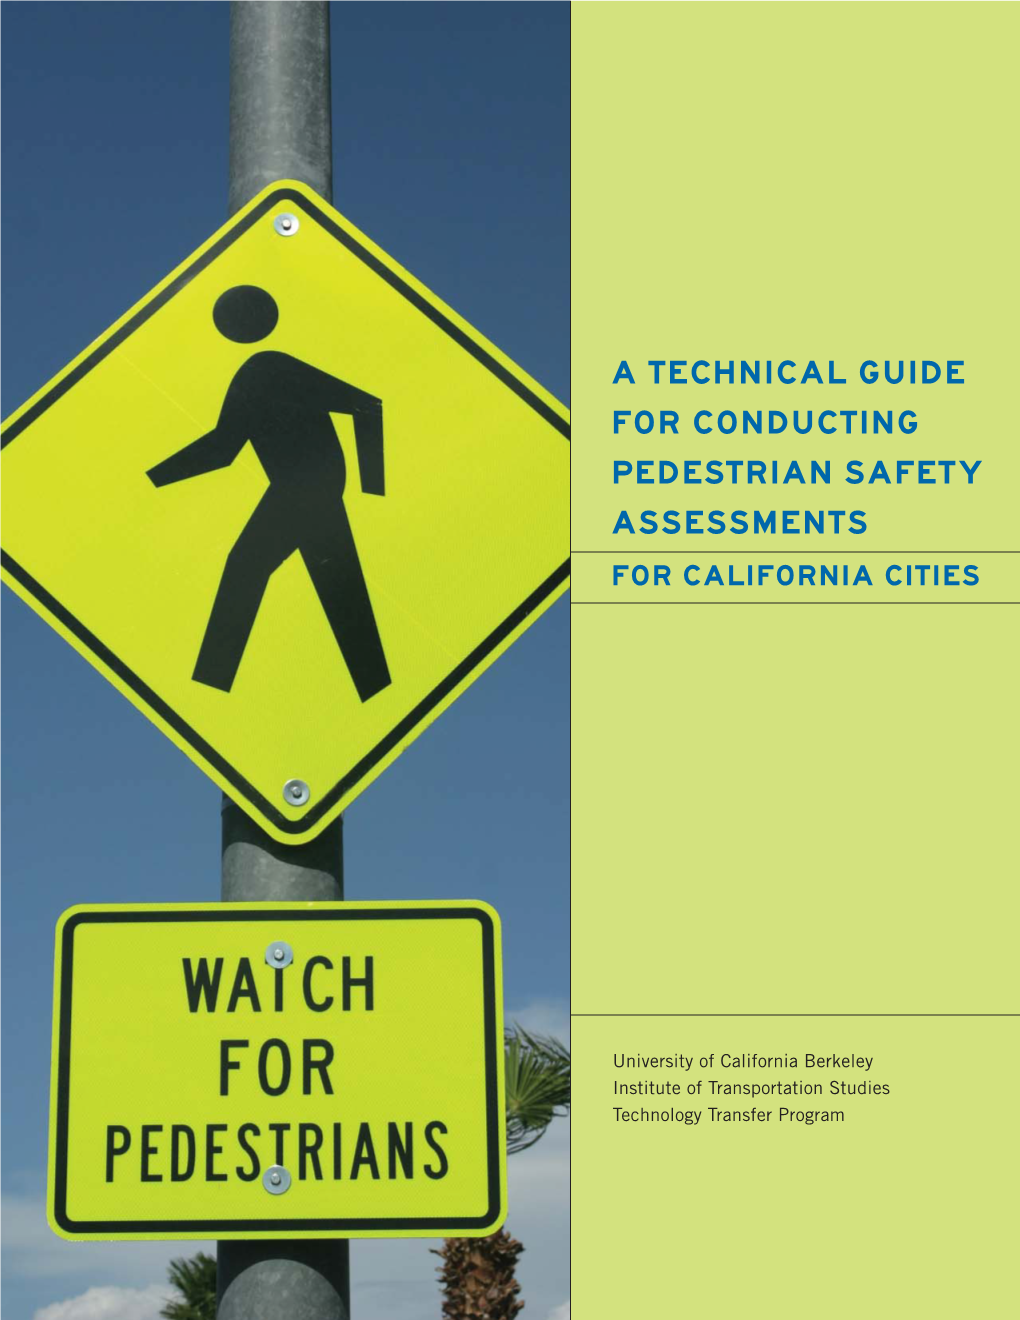 A Technical Guide for Conducting Pedestrian Safety Assessments for California Cities